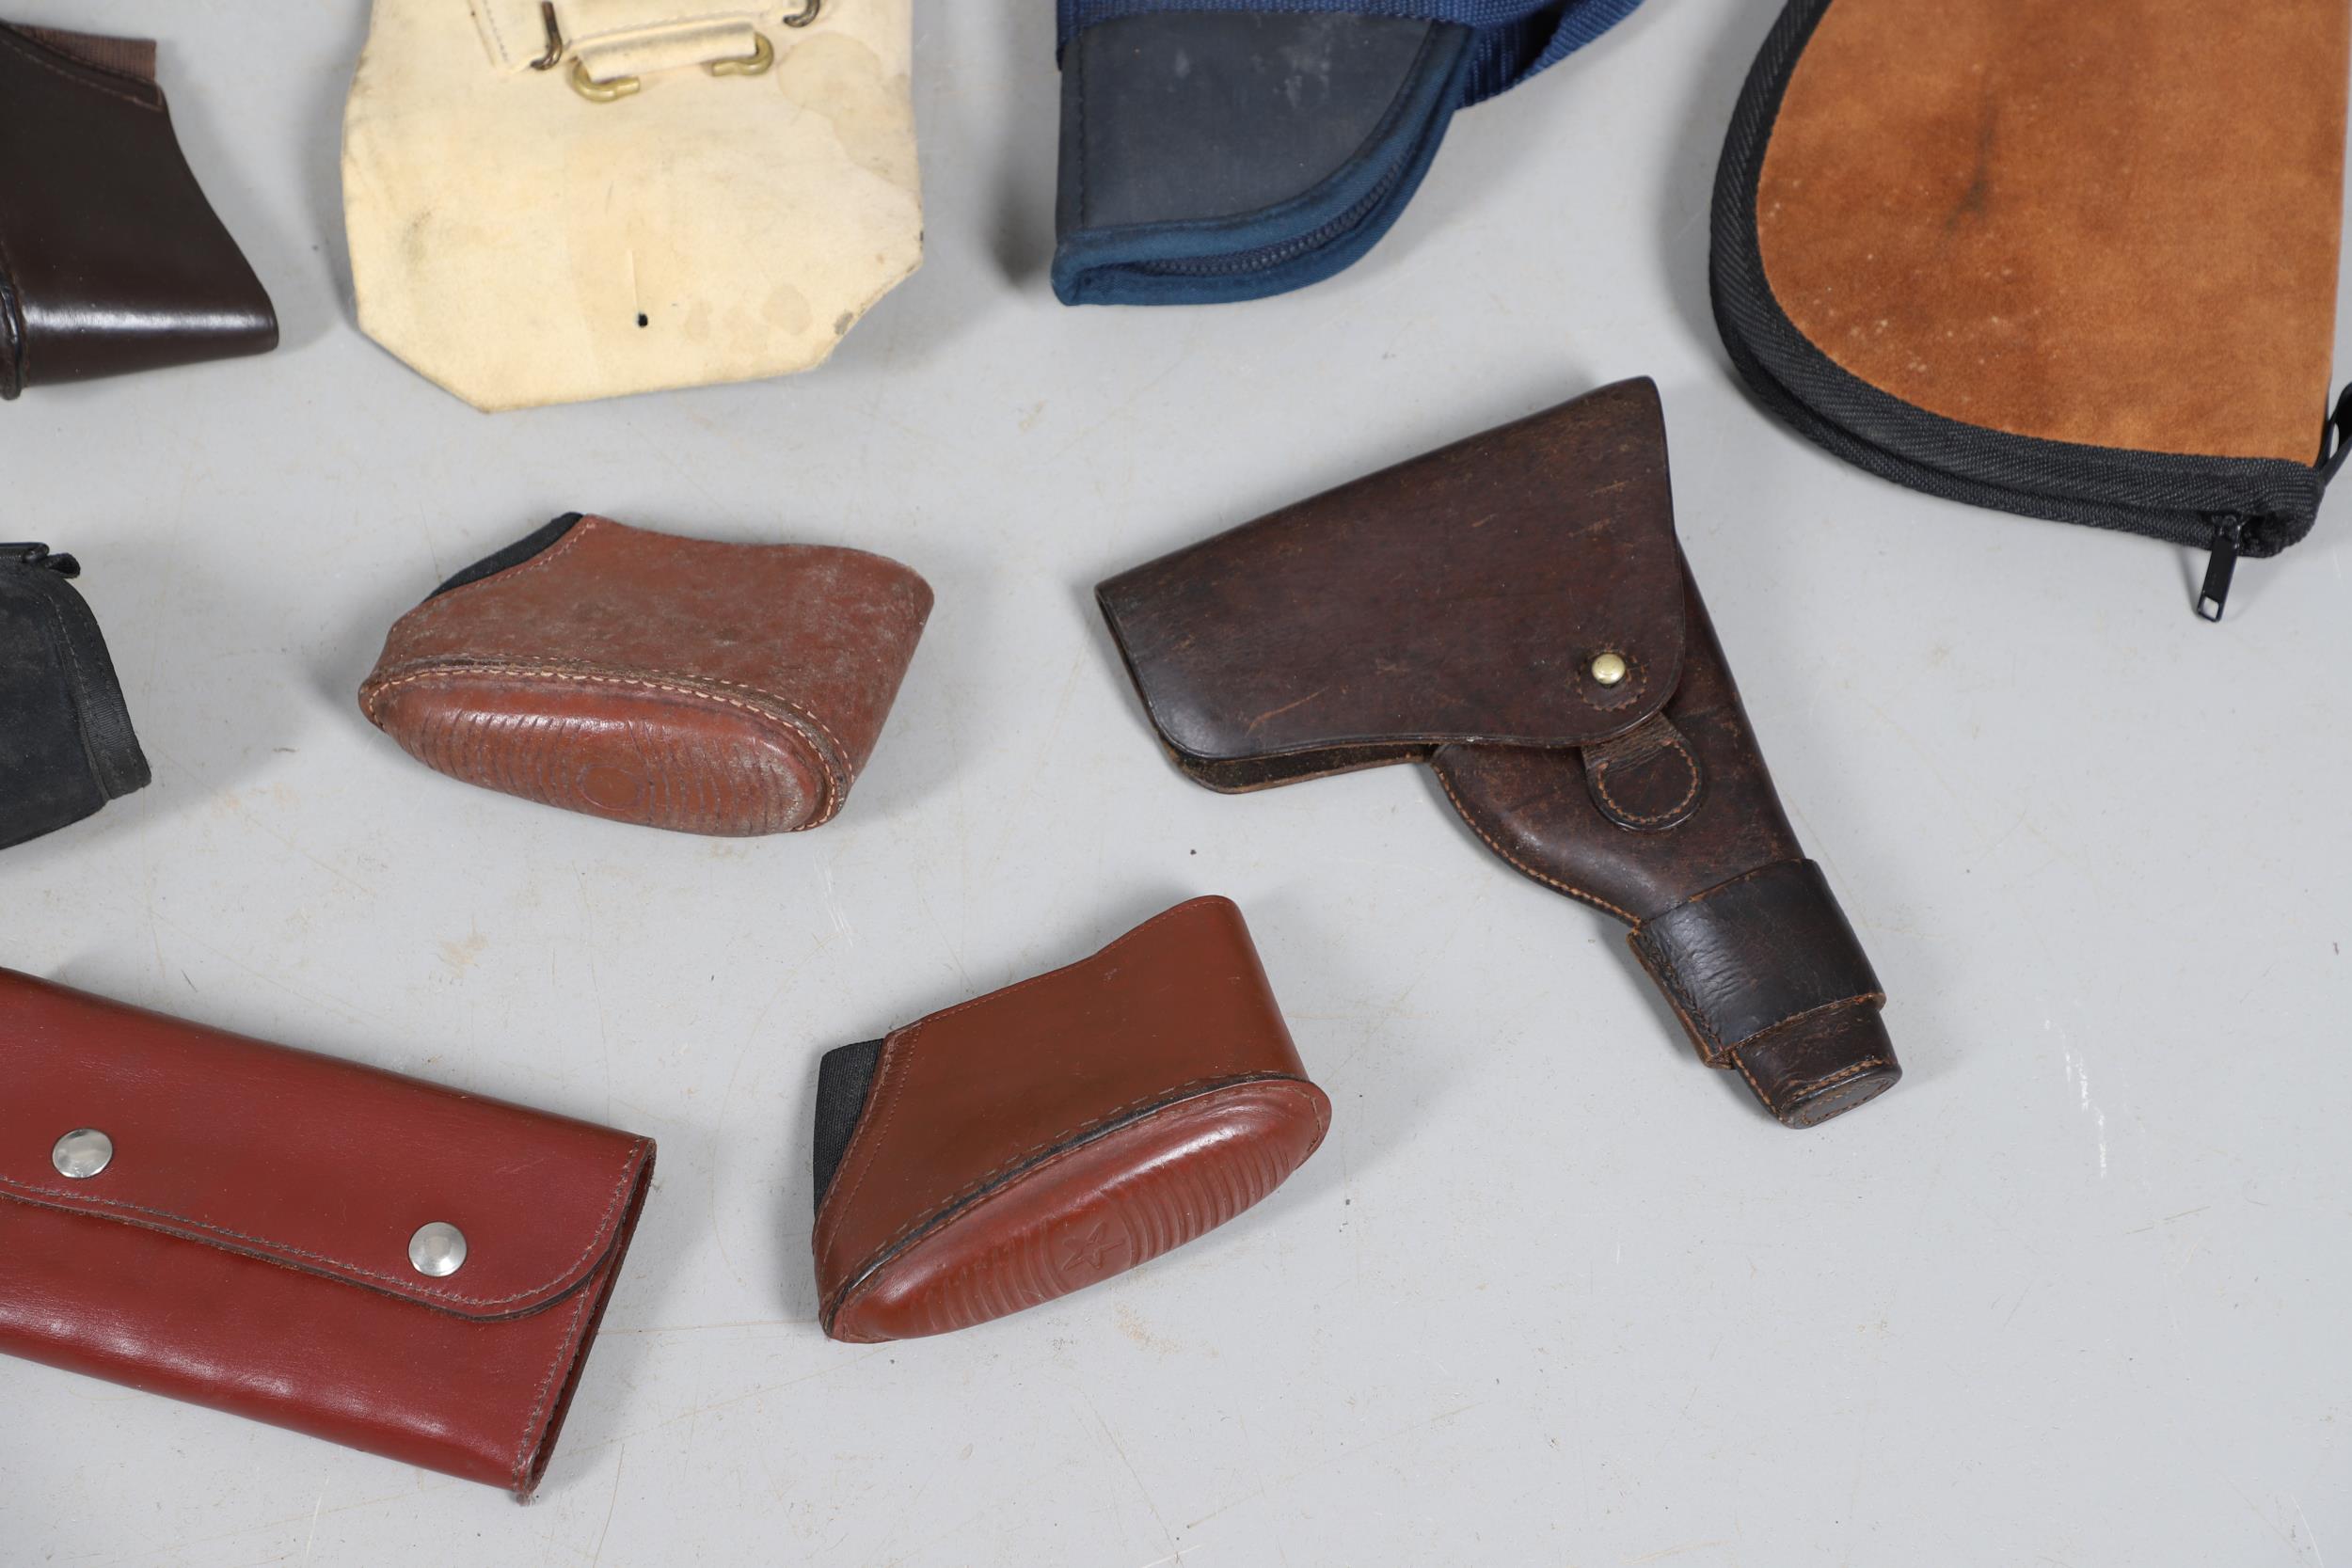 A BROWN LEATHER PISTOL HOLSTER AND OTHERS SIMILAR. - Image 5 of 6